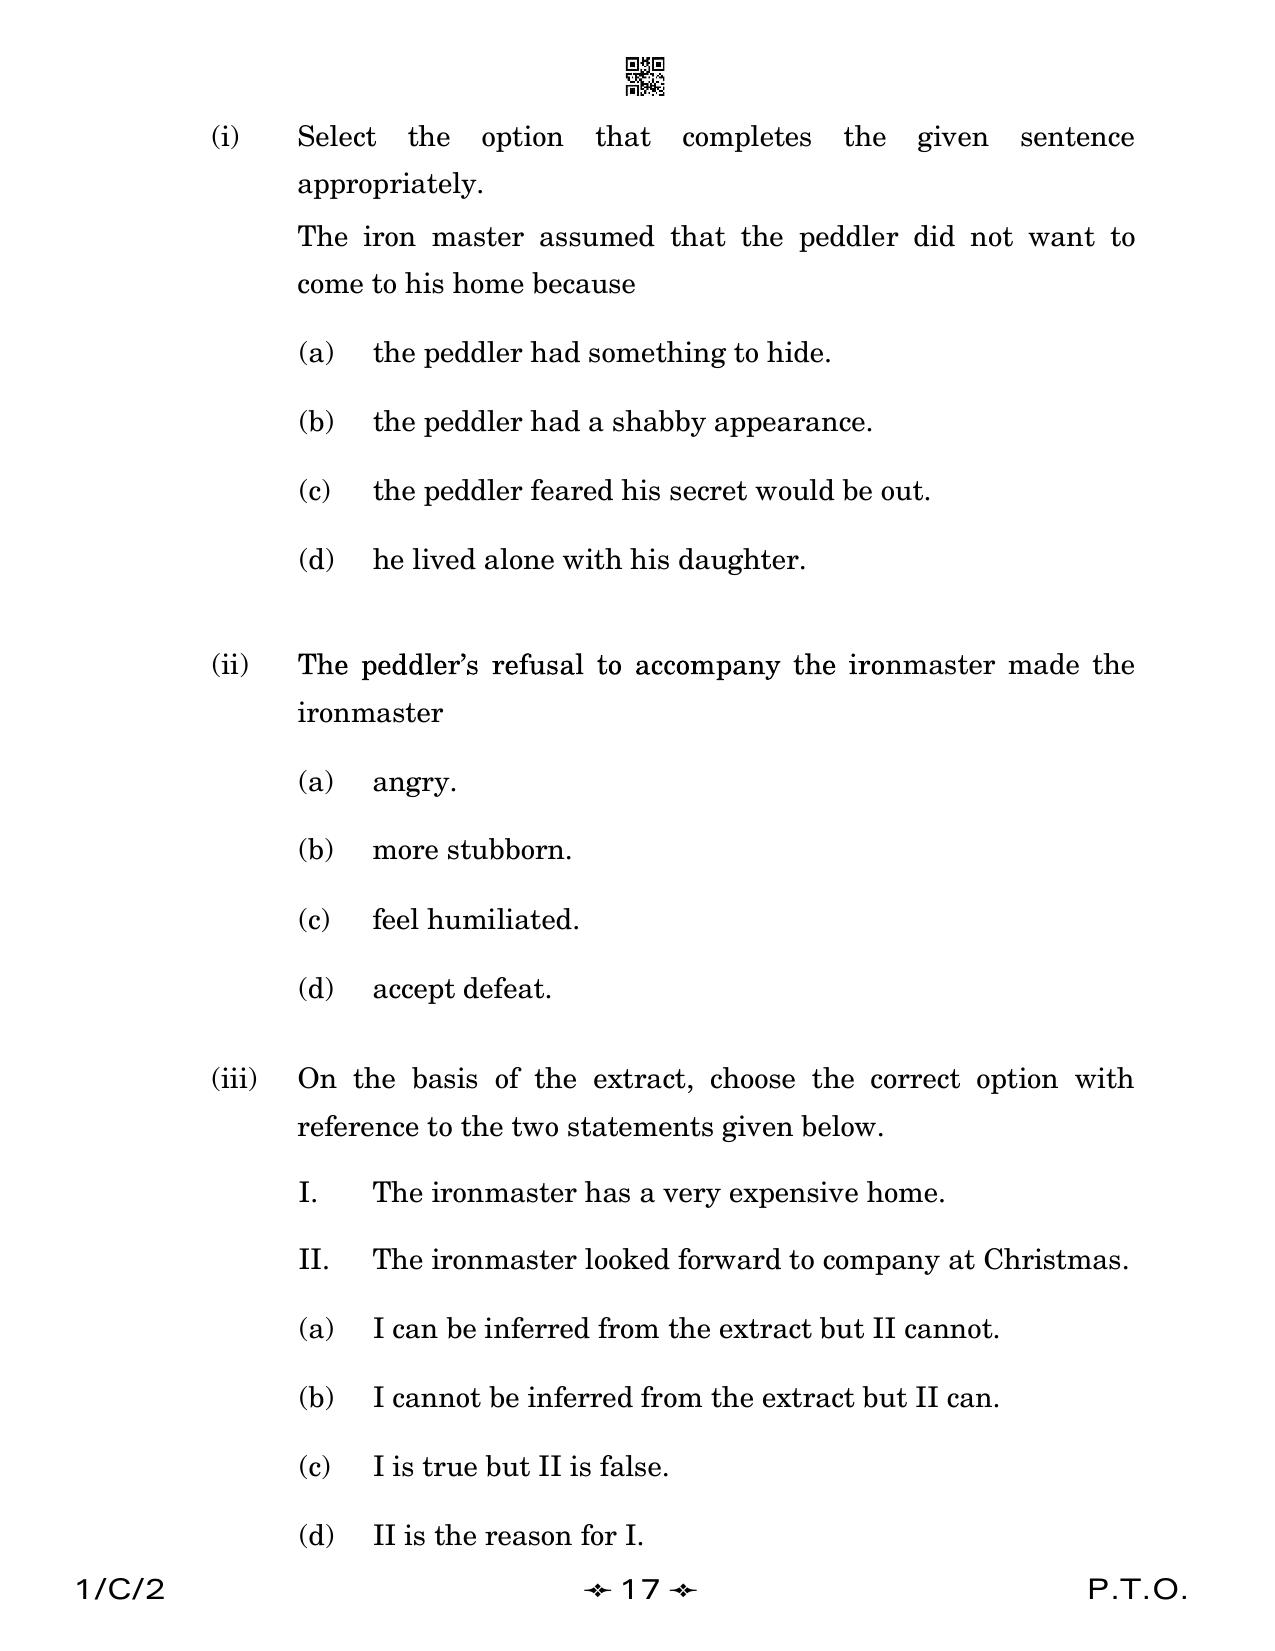 CBSE Class 12 1-2 English Core 2023 (Compartment) Question Paper - Page 17